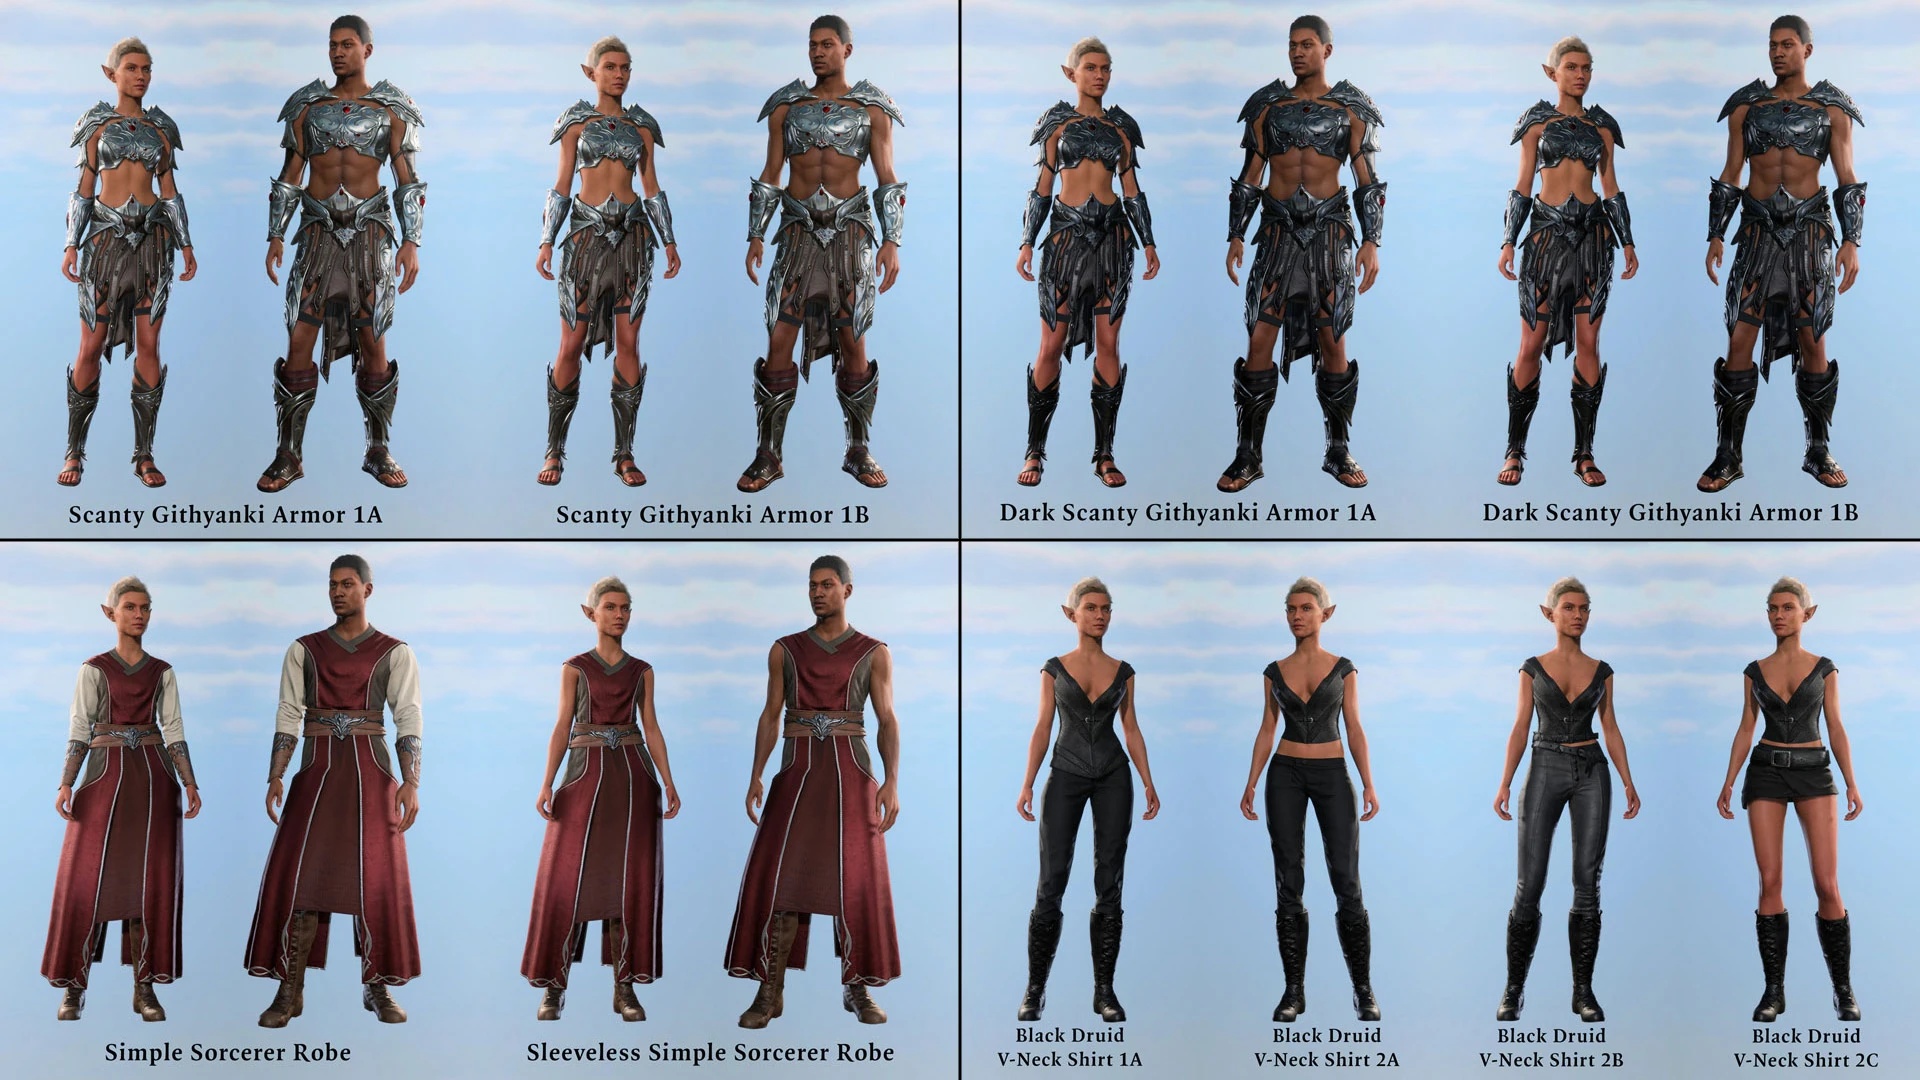 (Just a few of the clothing options. Image source: AnteMaxx)